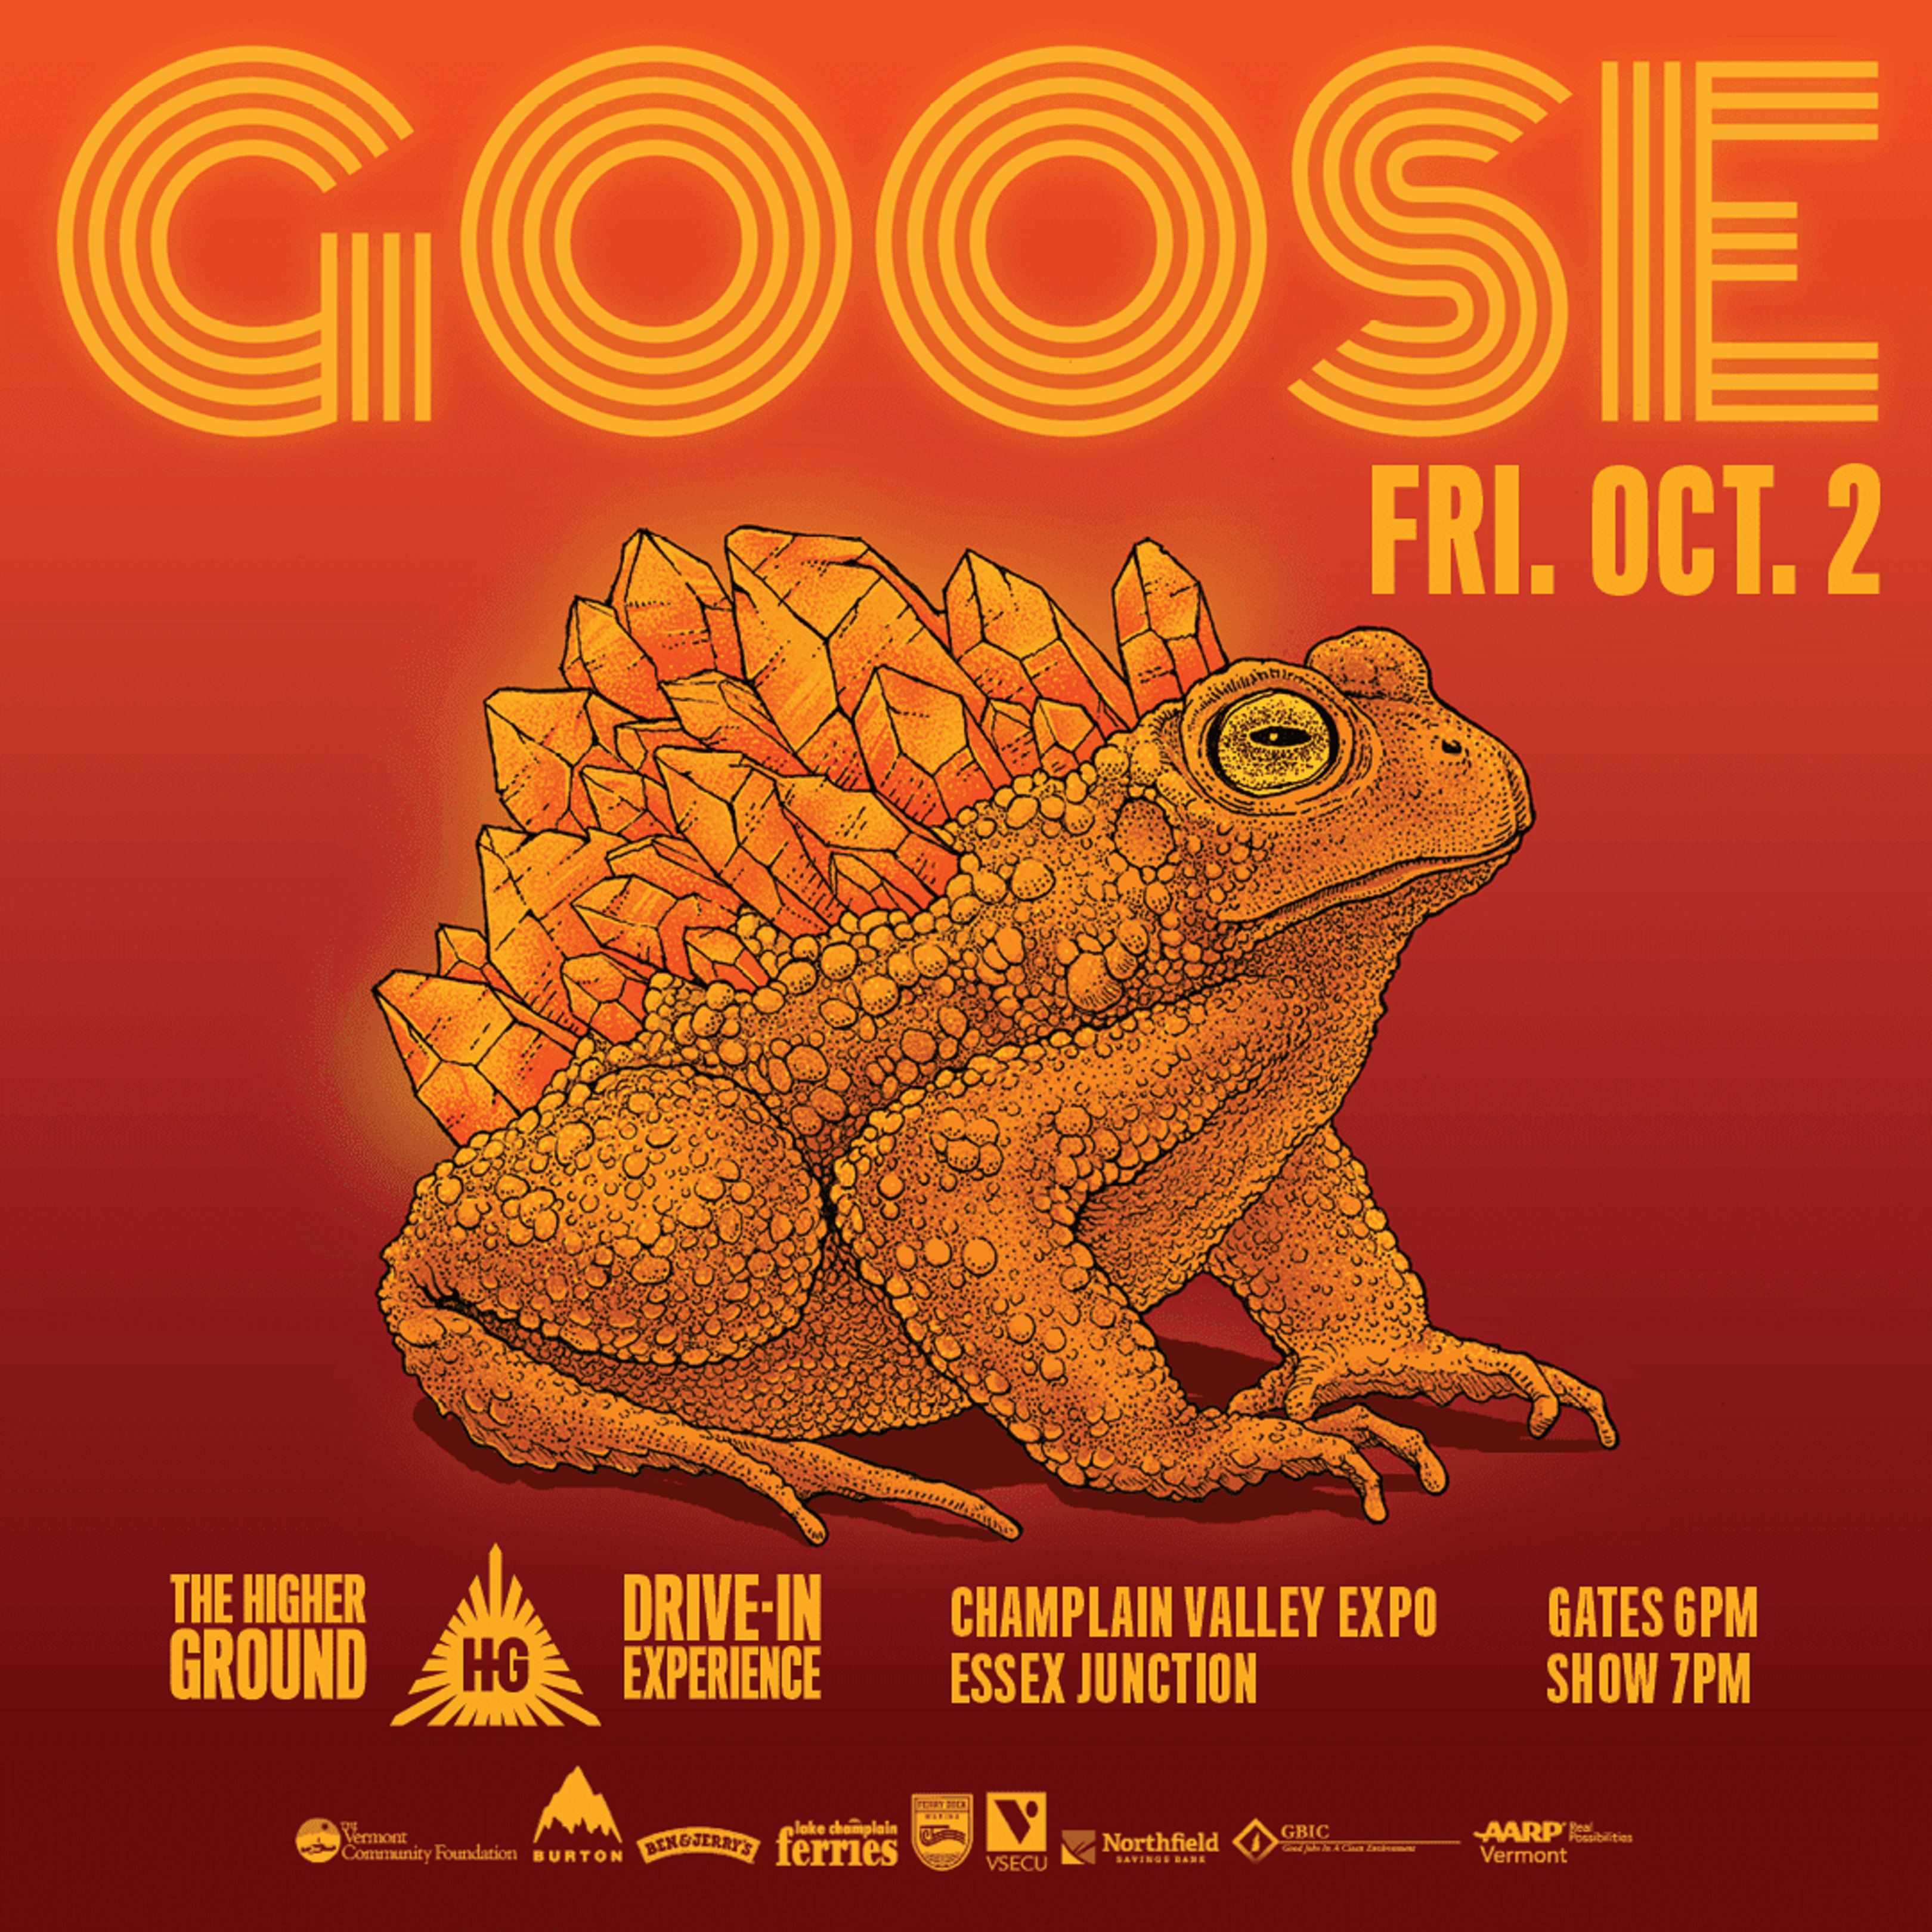 JUST ANNOUNCED: Goose at the Higher Ground Drive-In Experience